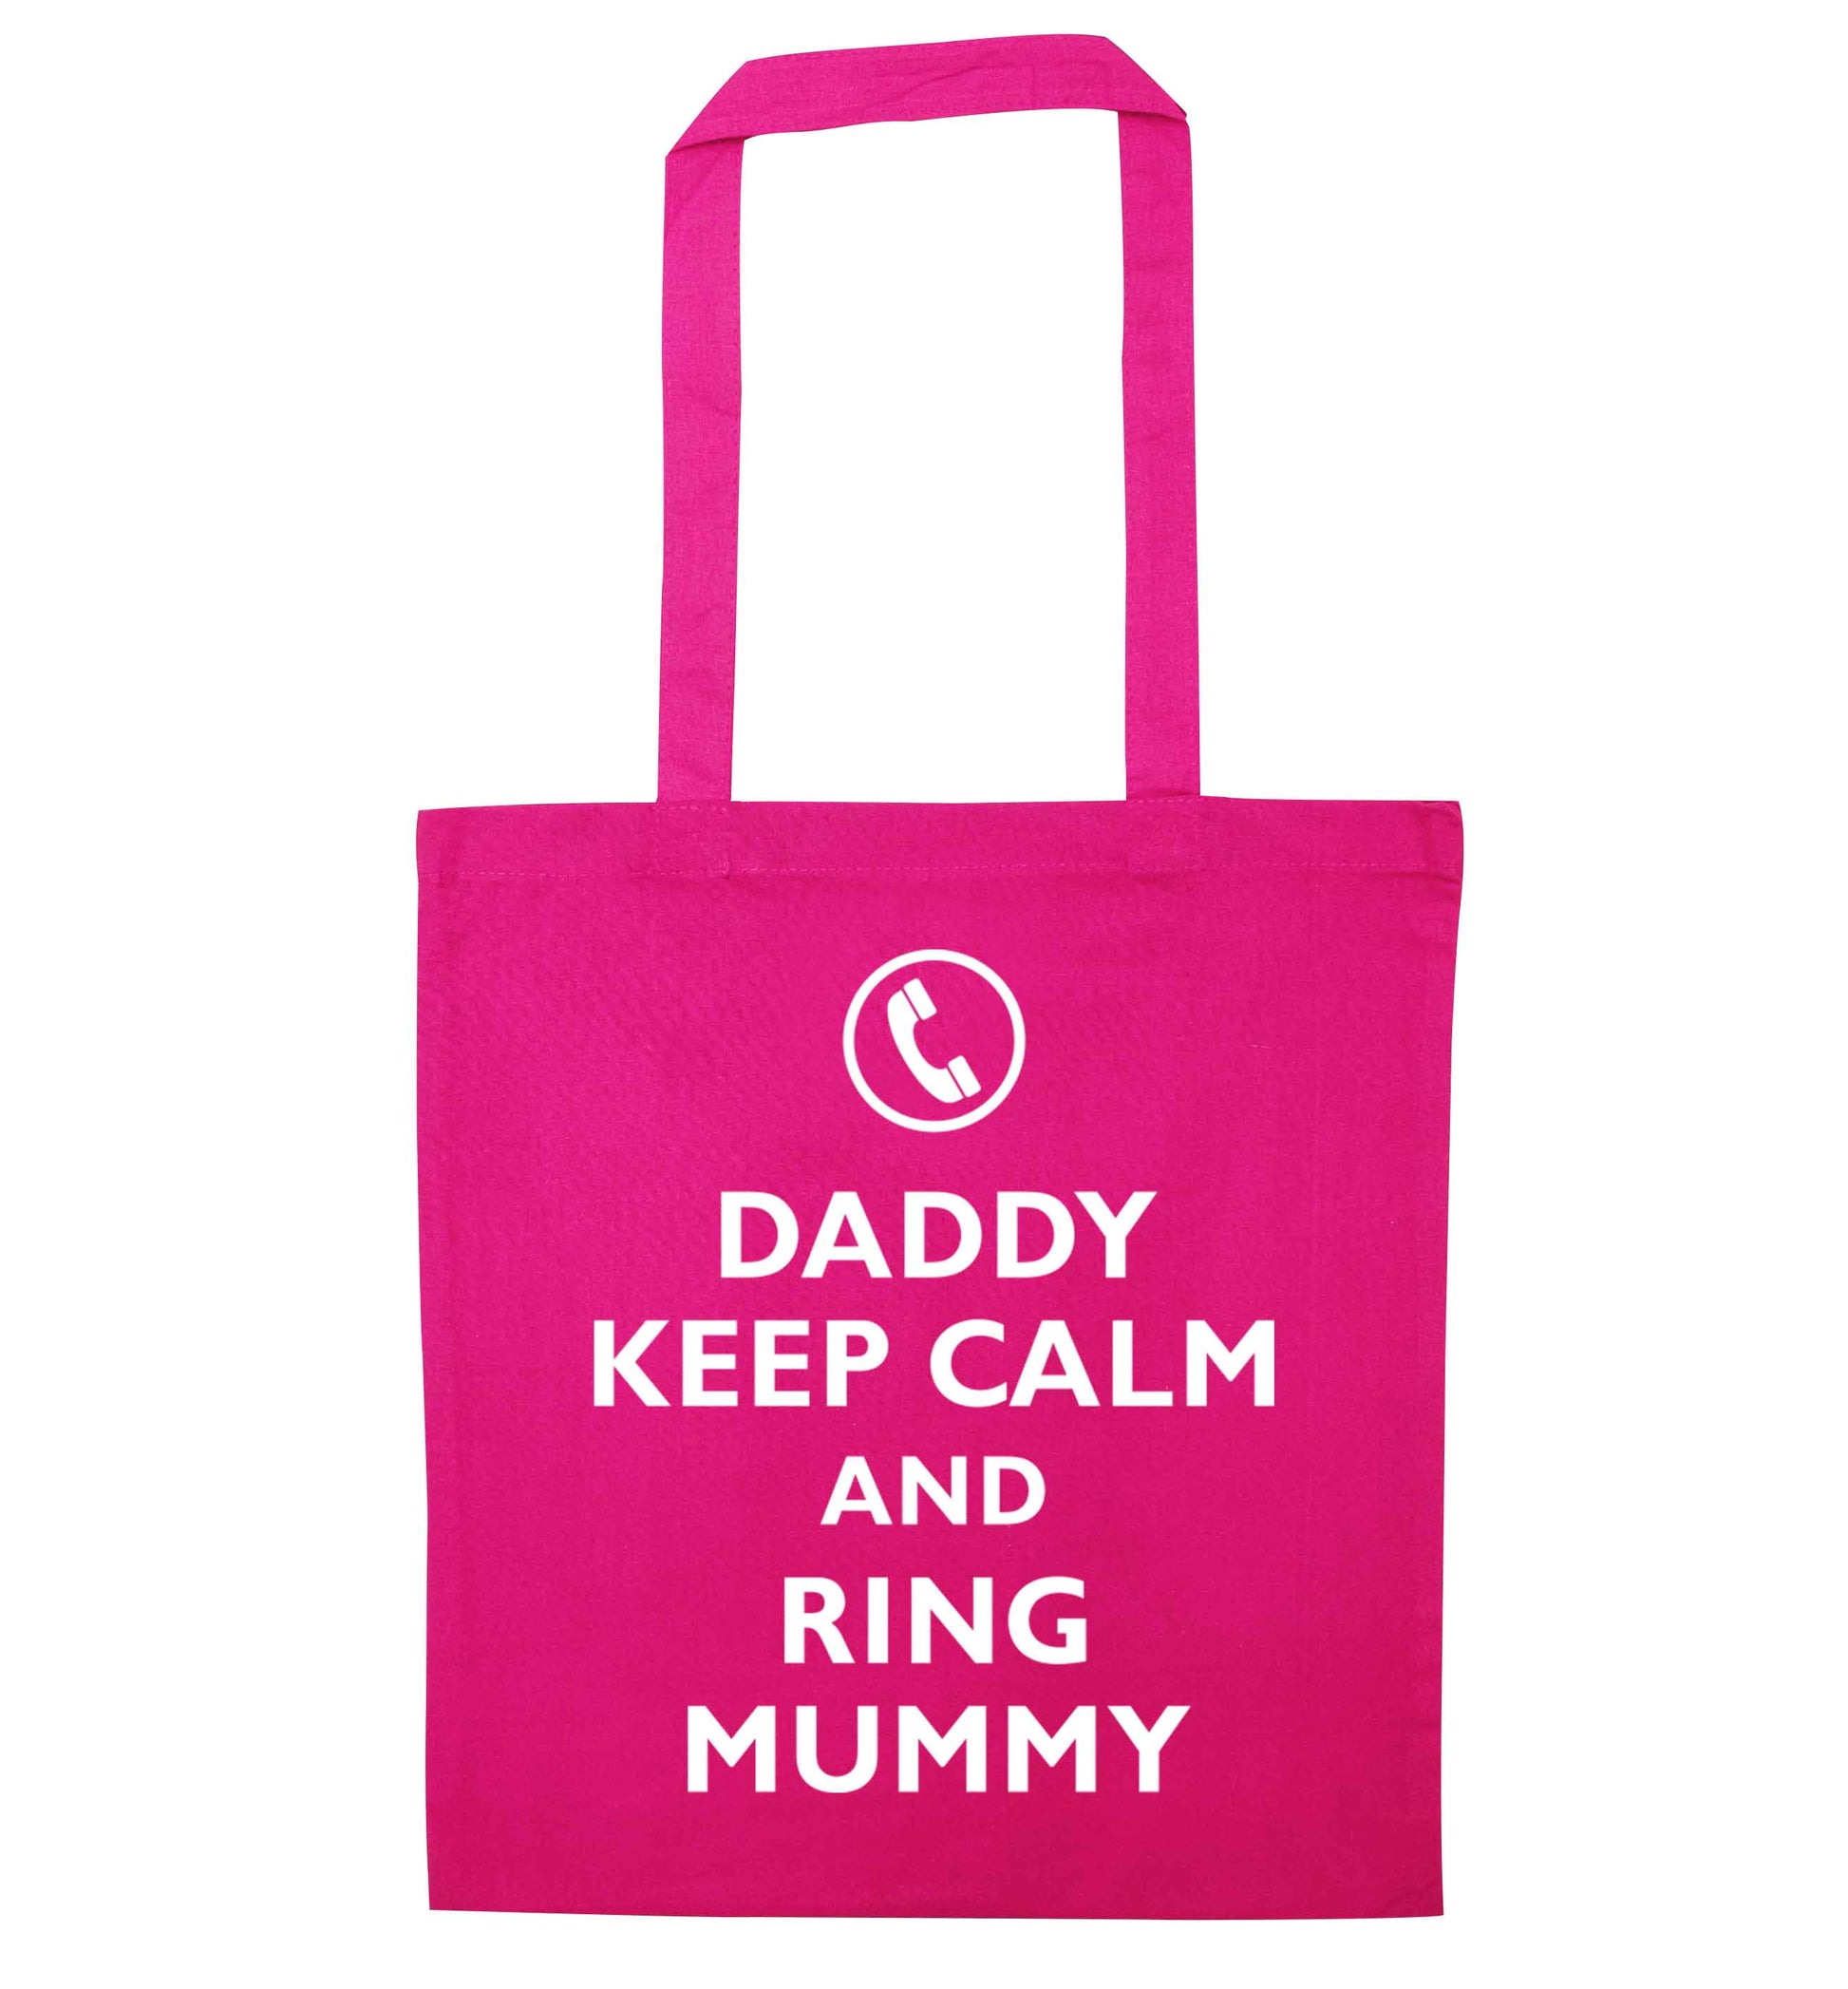 Daddy keep calm and ring mummy pink tote bag